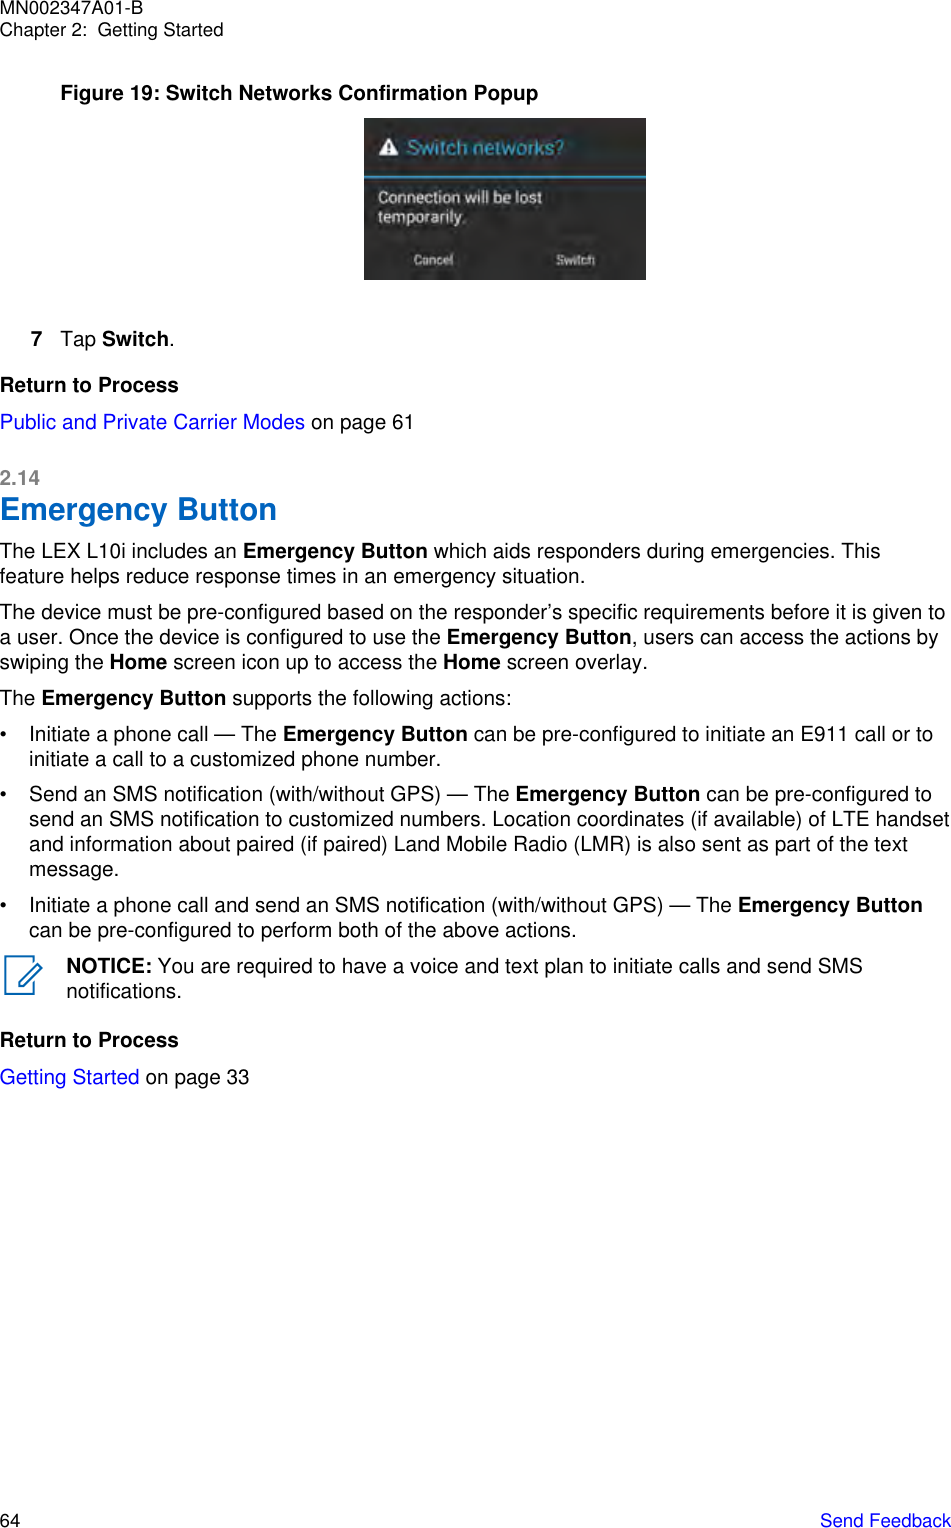 Figure 19: Switch Networks Confirmation Popup7Tap Switch.Return to ProcessPublic and Private Carrier Modes on page 612.14Emergency ButtonThe LEX L10i includes an Emergency Button which aids responders during emergencies. Thisfeature helps reduce response times in an emergency situation.The device must be pre-configured based on the responder’s specific requirements before it is given toa user. Once the device is configured to use the Emergency Button, users can access the actions byswiping the Home screen icon up to access the Home screen overlay.The Emergency Button supports the following actions:• Initiate a phone call — The Emergency Button can be pre-configured to initiate an E911 call or toinitiate a call to a customized phone number.• Send an SMS notification (with/without GPS) — The Emergency Button can be pre-configured tosend an SMS notification to customized numbers. Location coordinates (if available) of LTE handsetand information about paired (if paired) Land Mobile Radio (LMR) is also sent as part of the textmessage.• Initiate a phone call and send an SMS notification (with/without GPS) — The Emergency Buttoncan be pre-configured to perform both of the above actions.NOTICE: You are required to have a voice and text plan to initiate calls and send SMSnotifications.Return to ProcessGetting Started on page 33MN002347A01-BChapter 2:  Getting Started64   Send Feedback